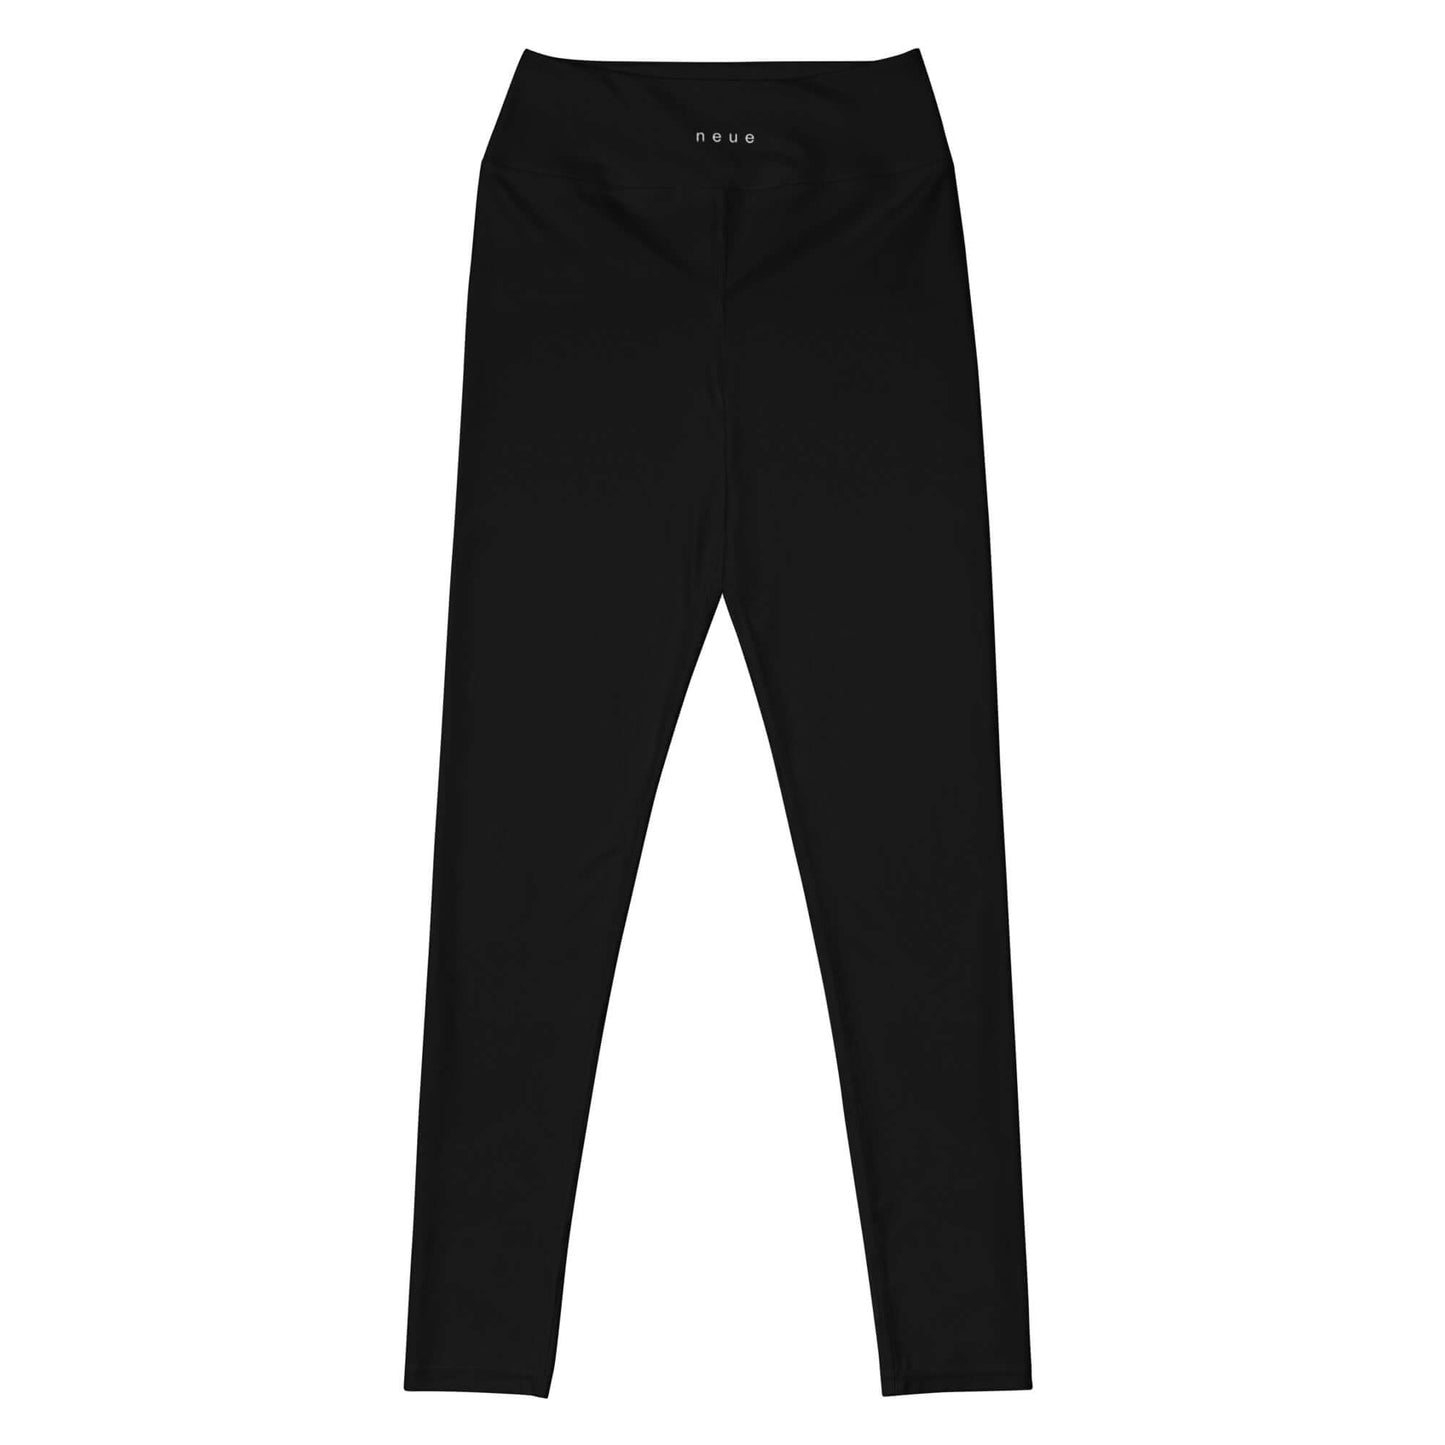 Neue Supply Co. Women's Align Leggings in black. Flat front view with hands on waist.